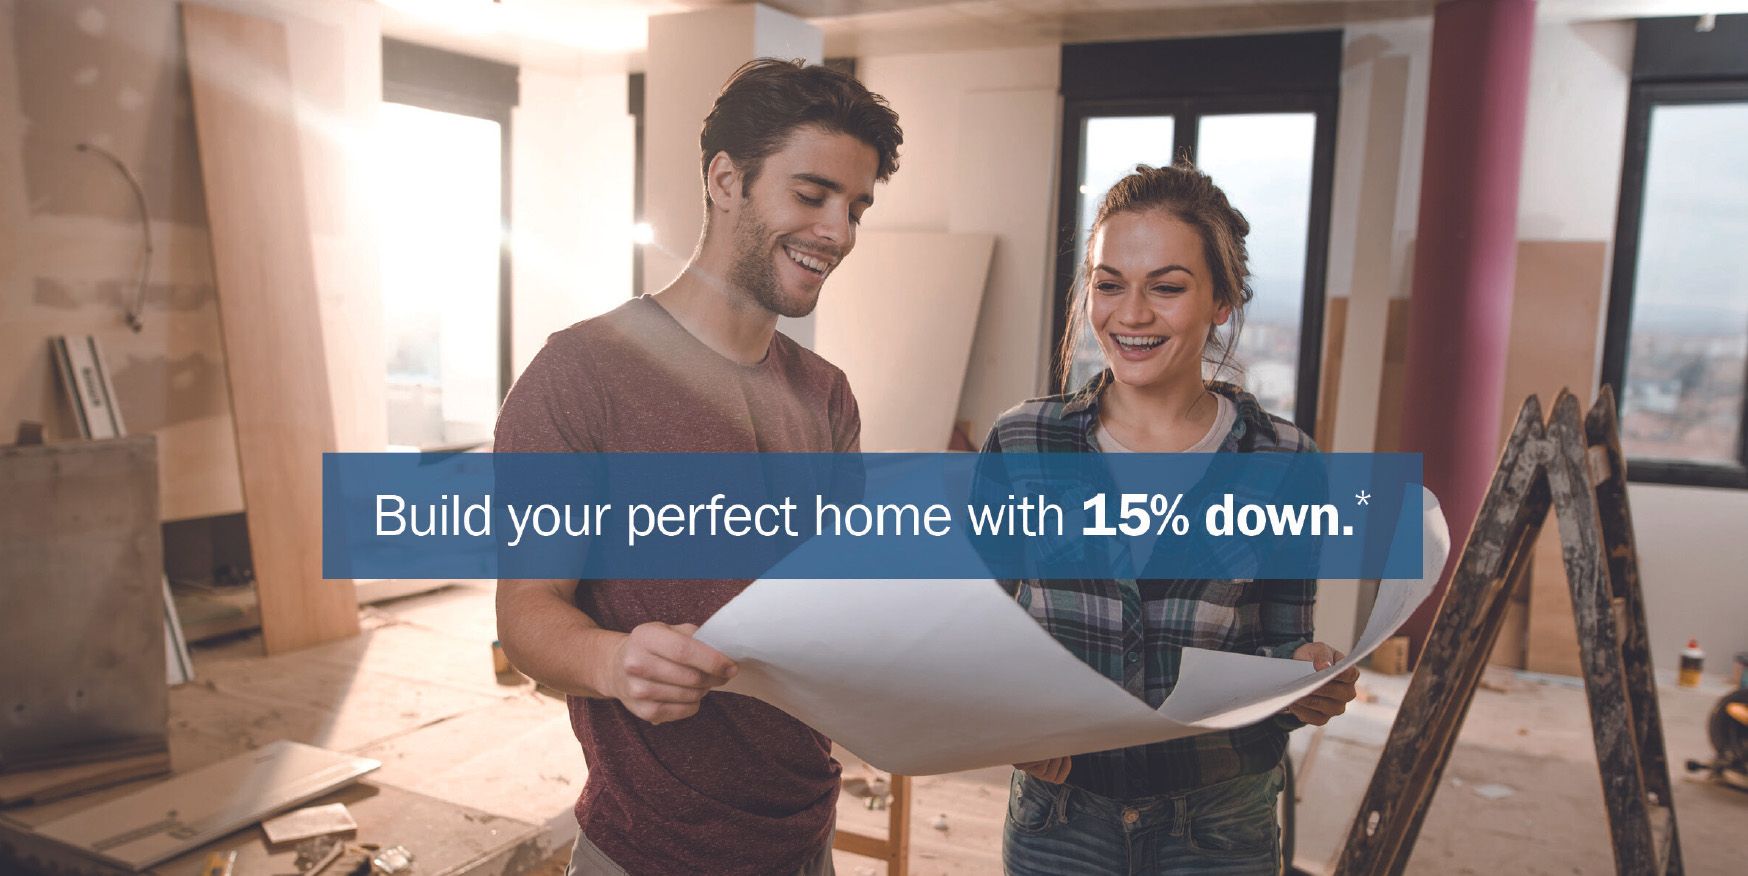 Build your perfect home with 15% down.